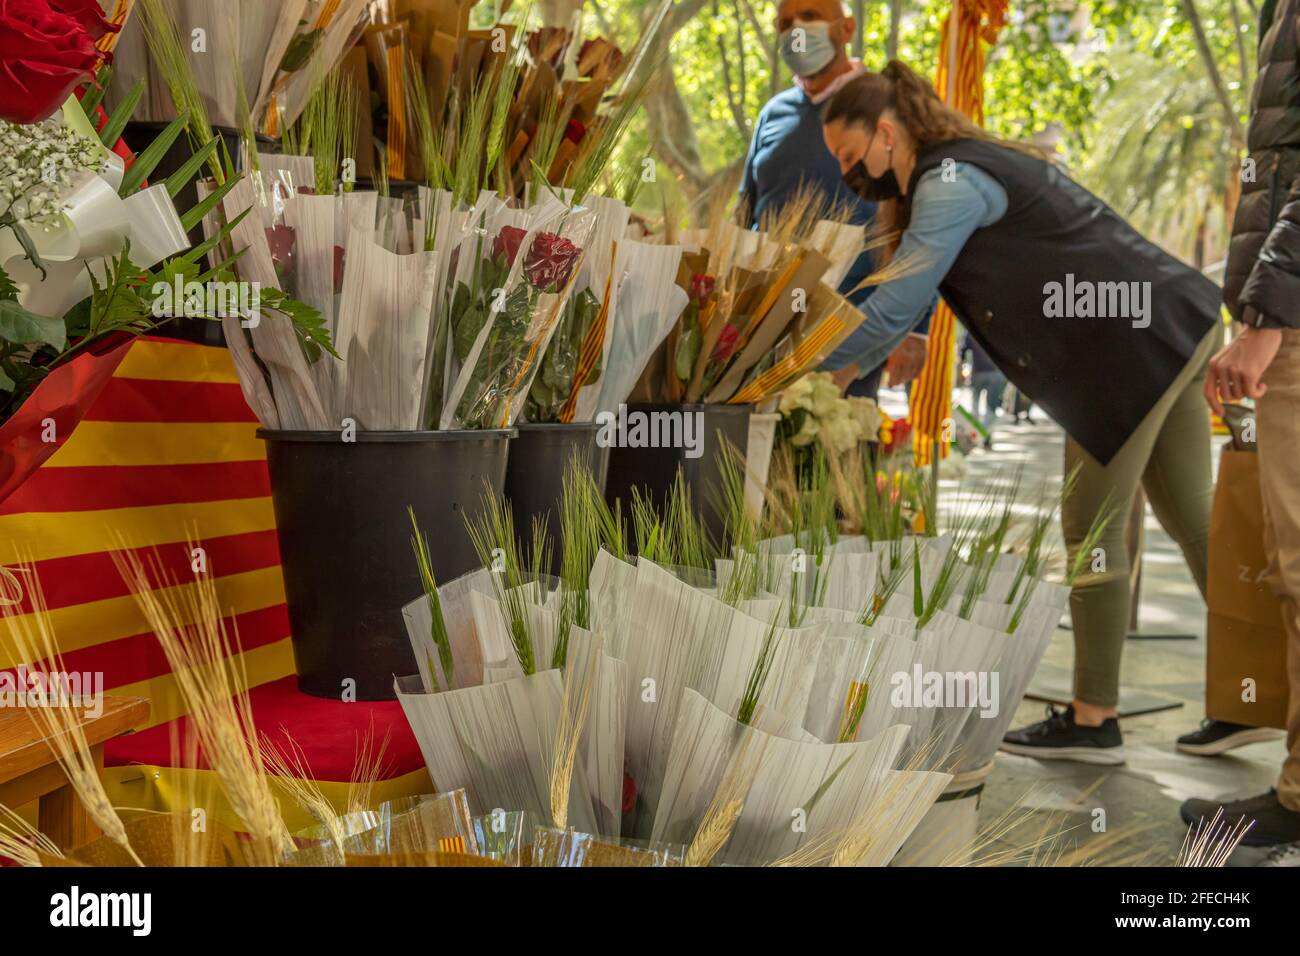 Palma de Mallorca; april 23 2021: Festivity of Sant Jordi or Book Day in times of the Coronavirus pandemic. Urban stalls selling flowers and roses in Stock Photo